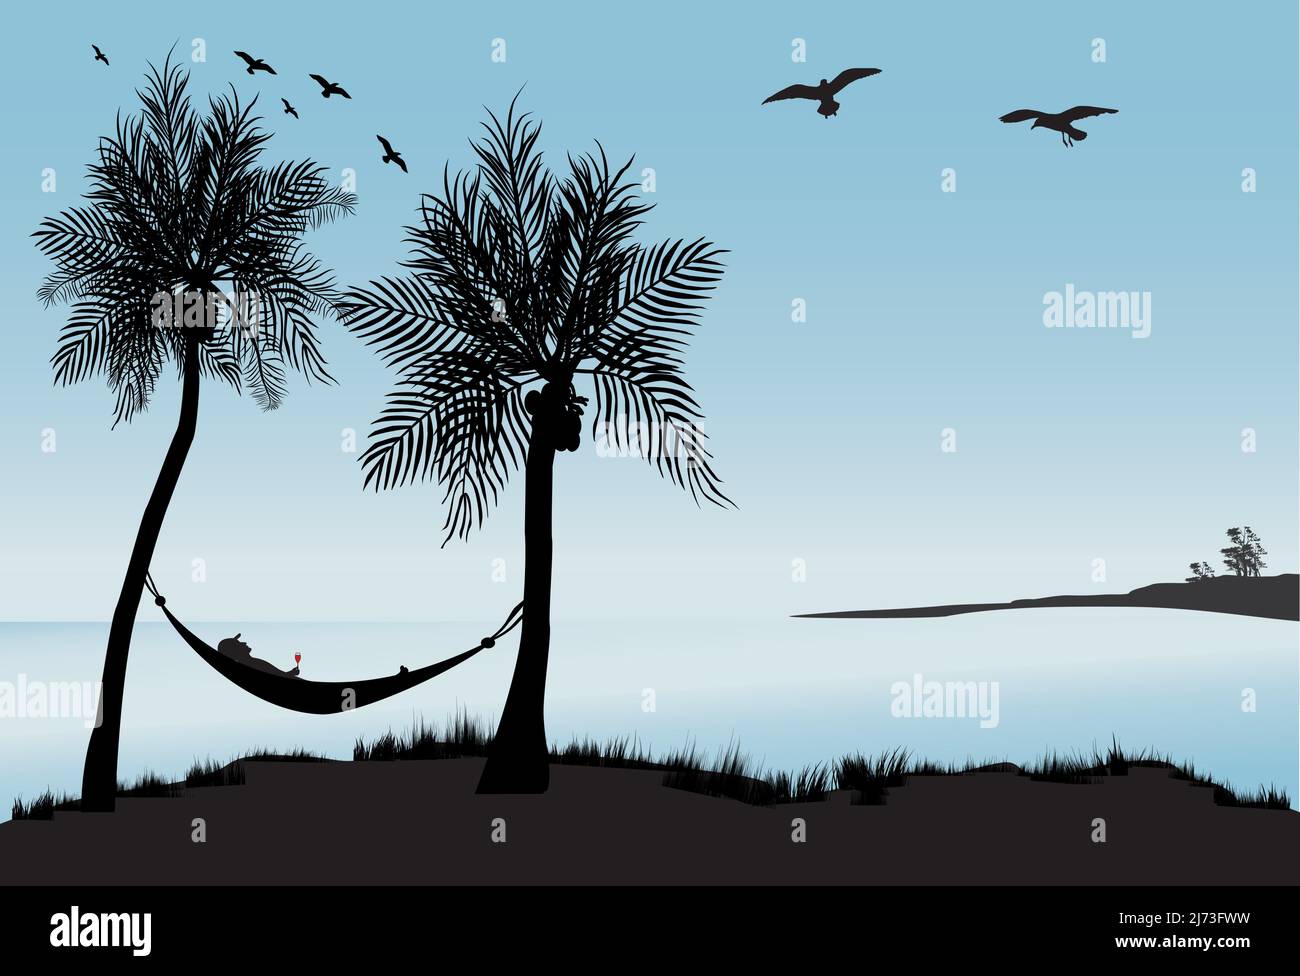 man enjoying a holiday at the beach in a tranquil setting Stock Vector